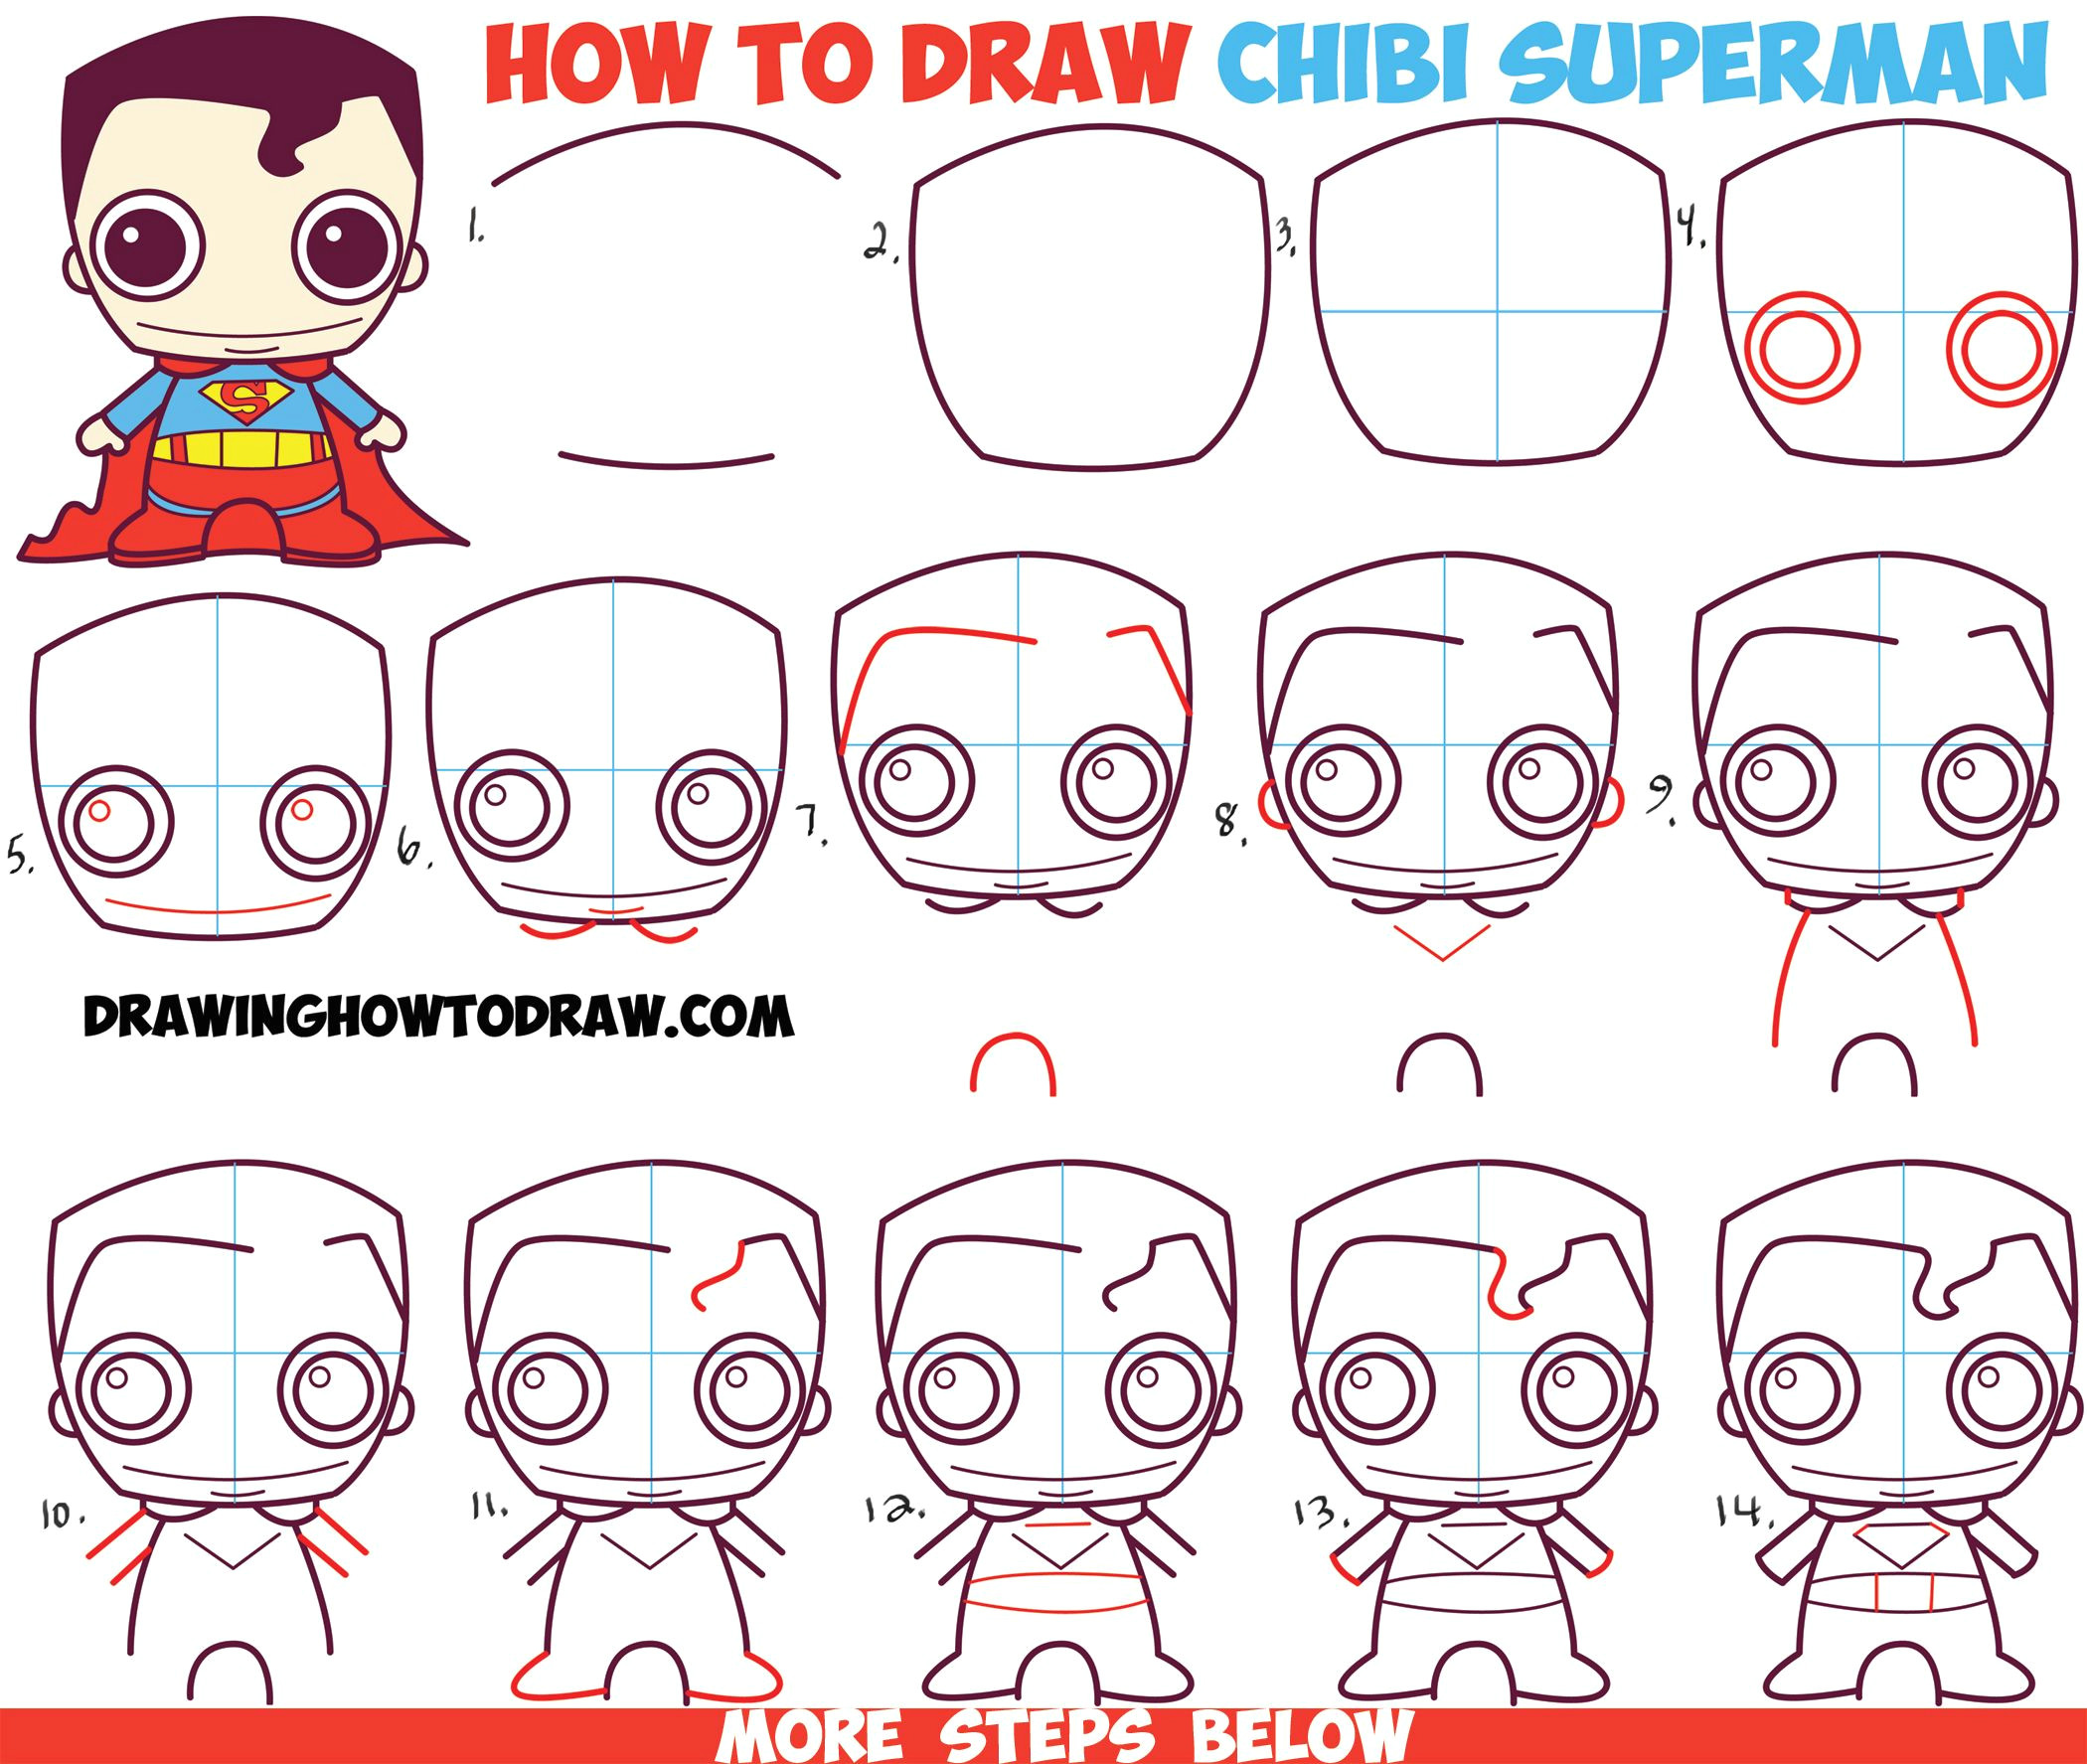 Easy to Draw Cute How to Draw Cute Chibi Superman From Dc Comics In Easy Step